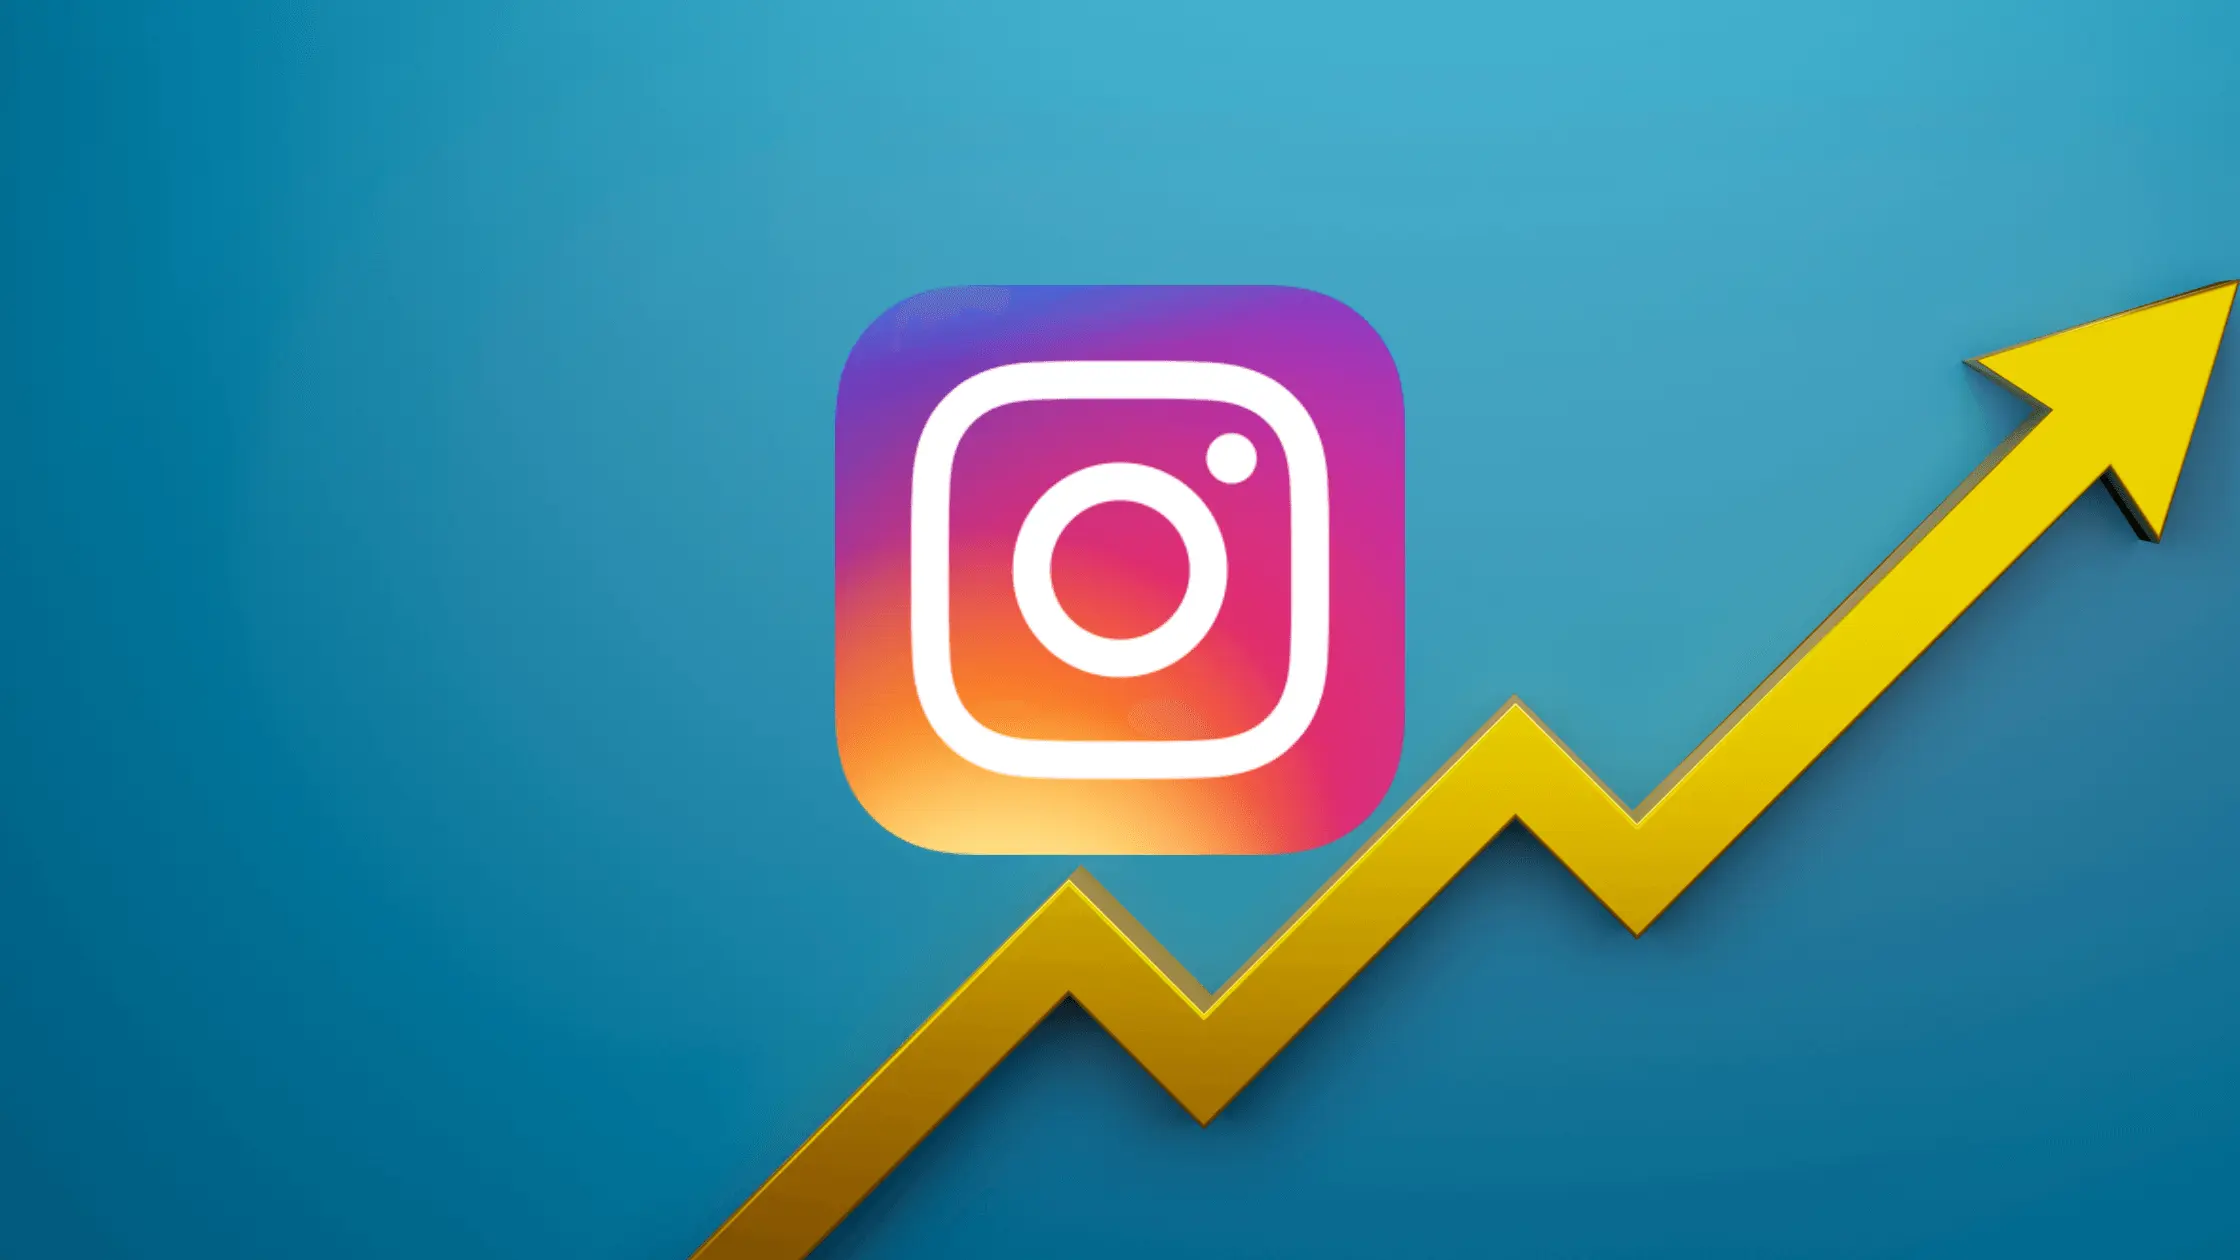 Instagram best practices for optimal engagement and growth. Instagram logo & Growth Line